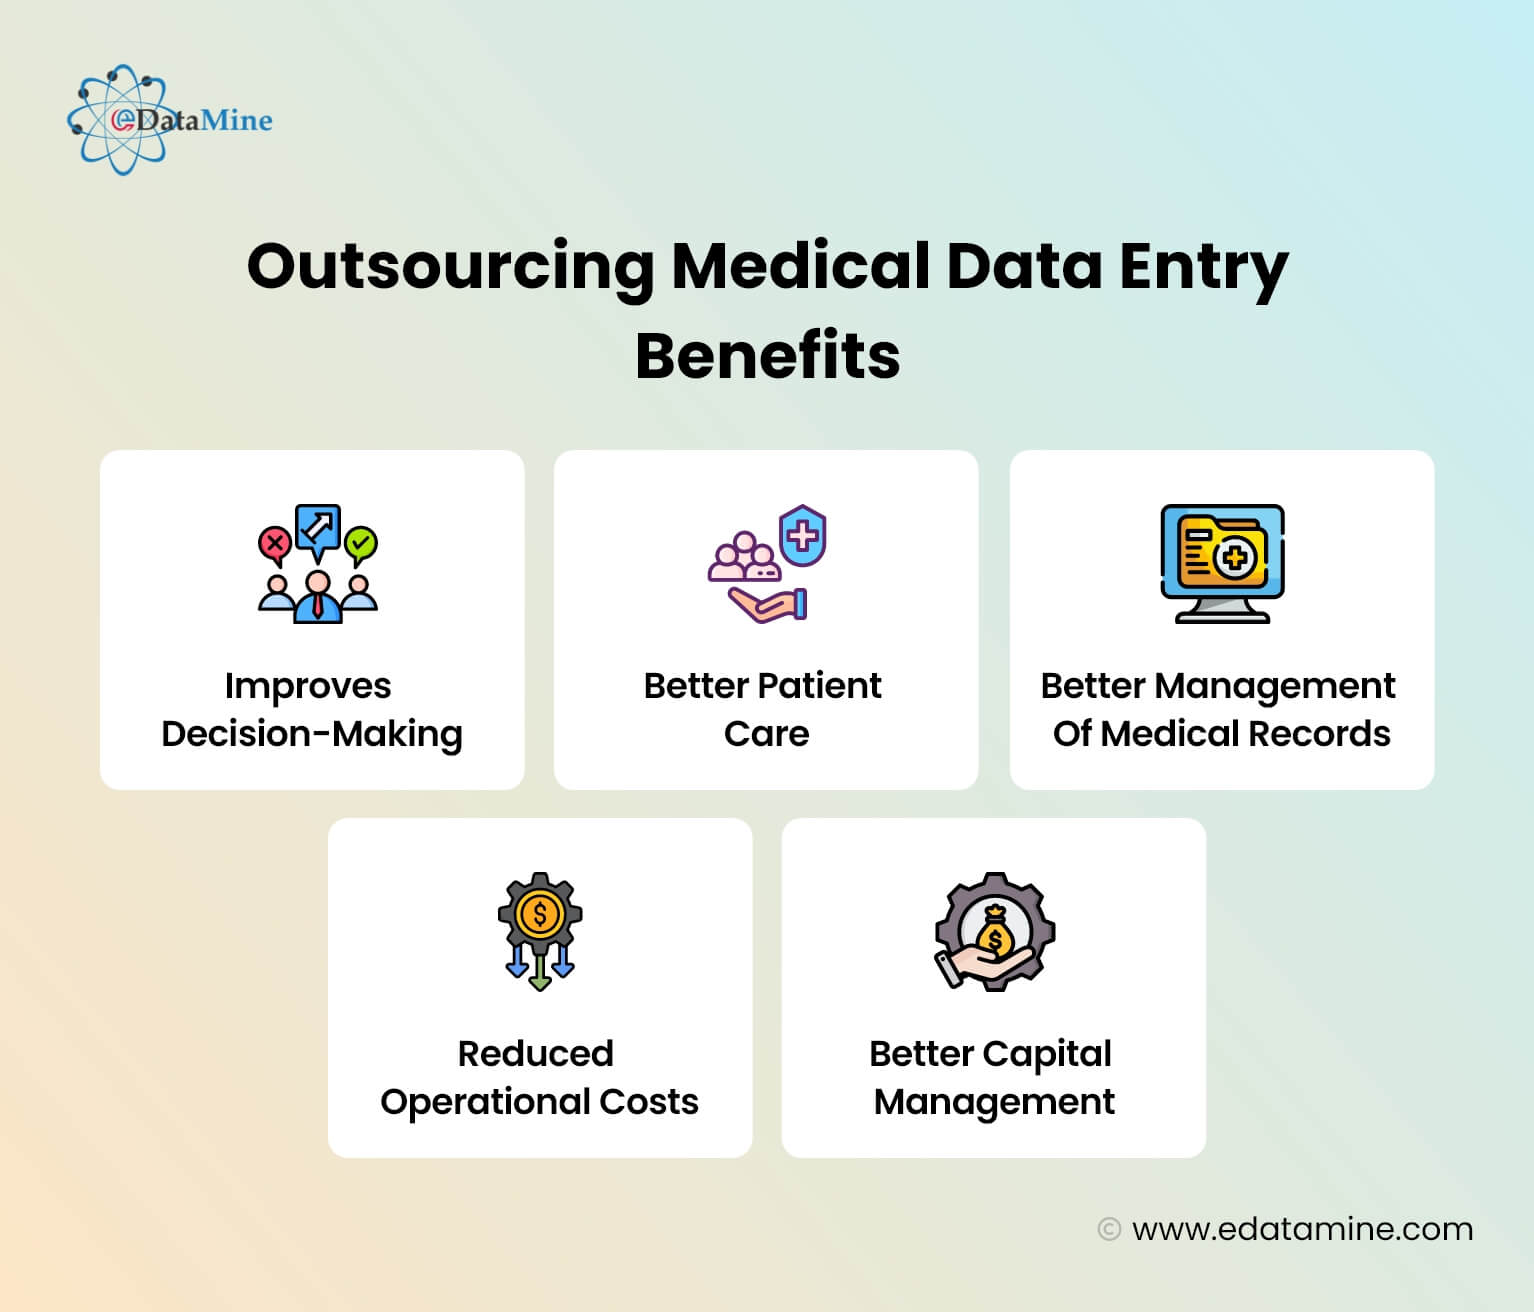 Outsourcing Medical Data Entry Benefits